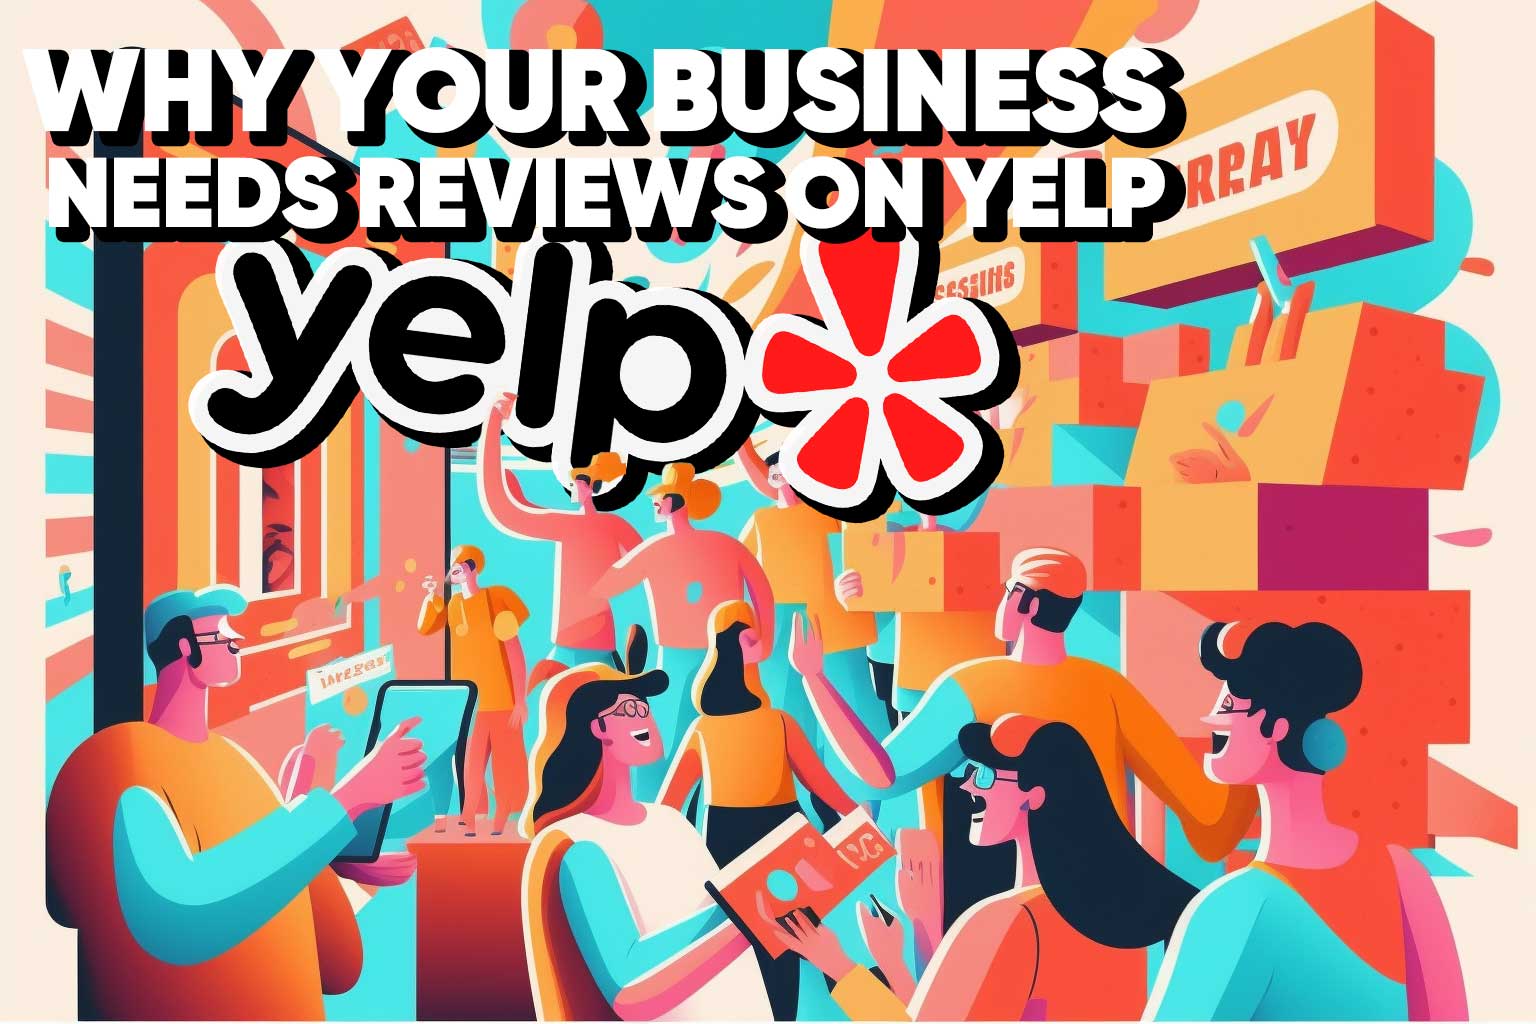 Why Your Business Needs Reviews on Yelp